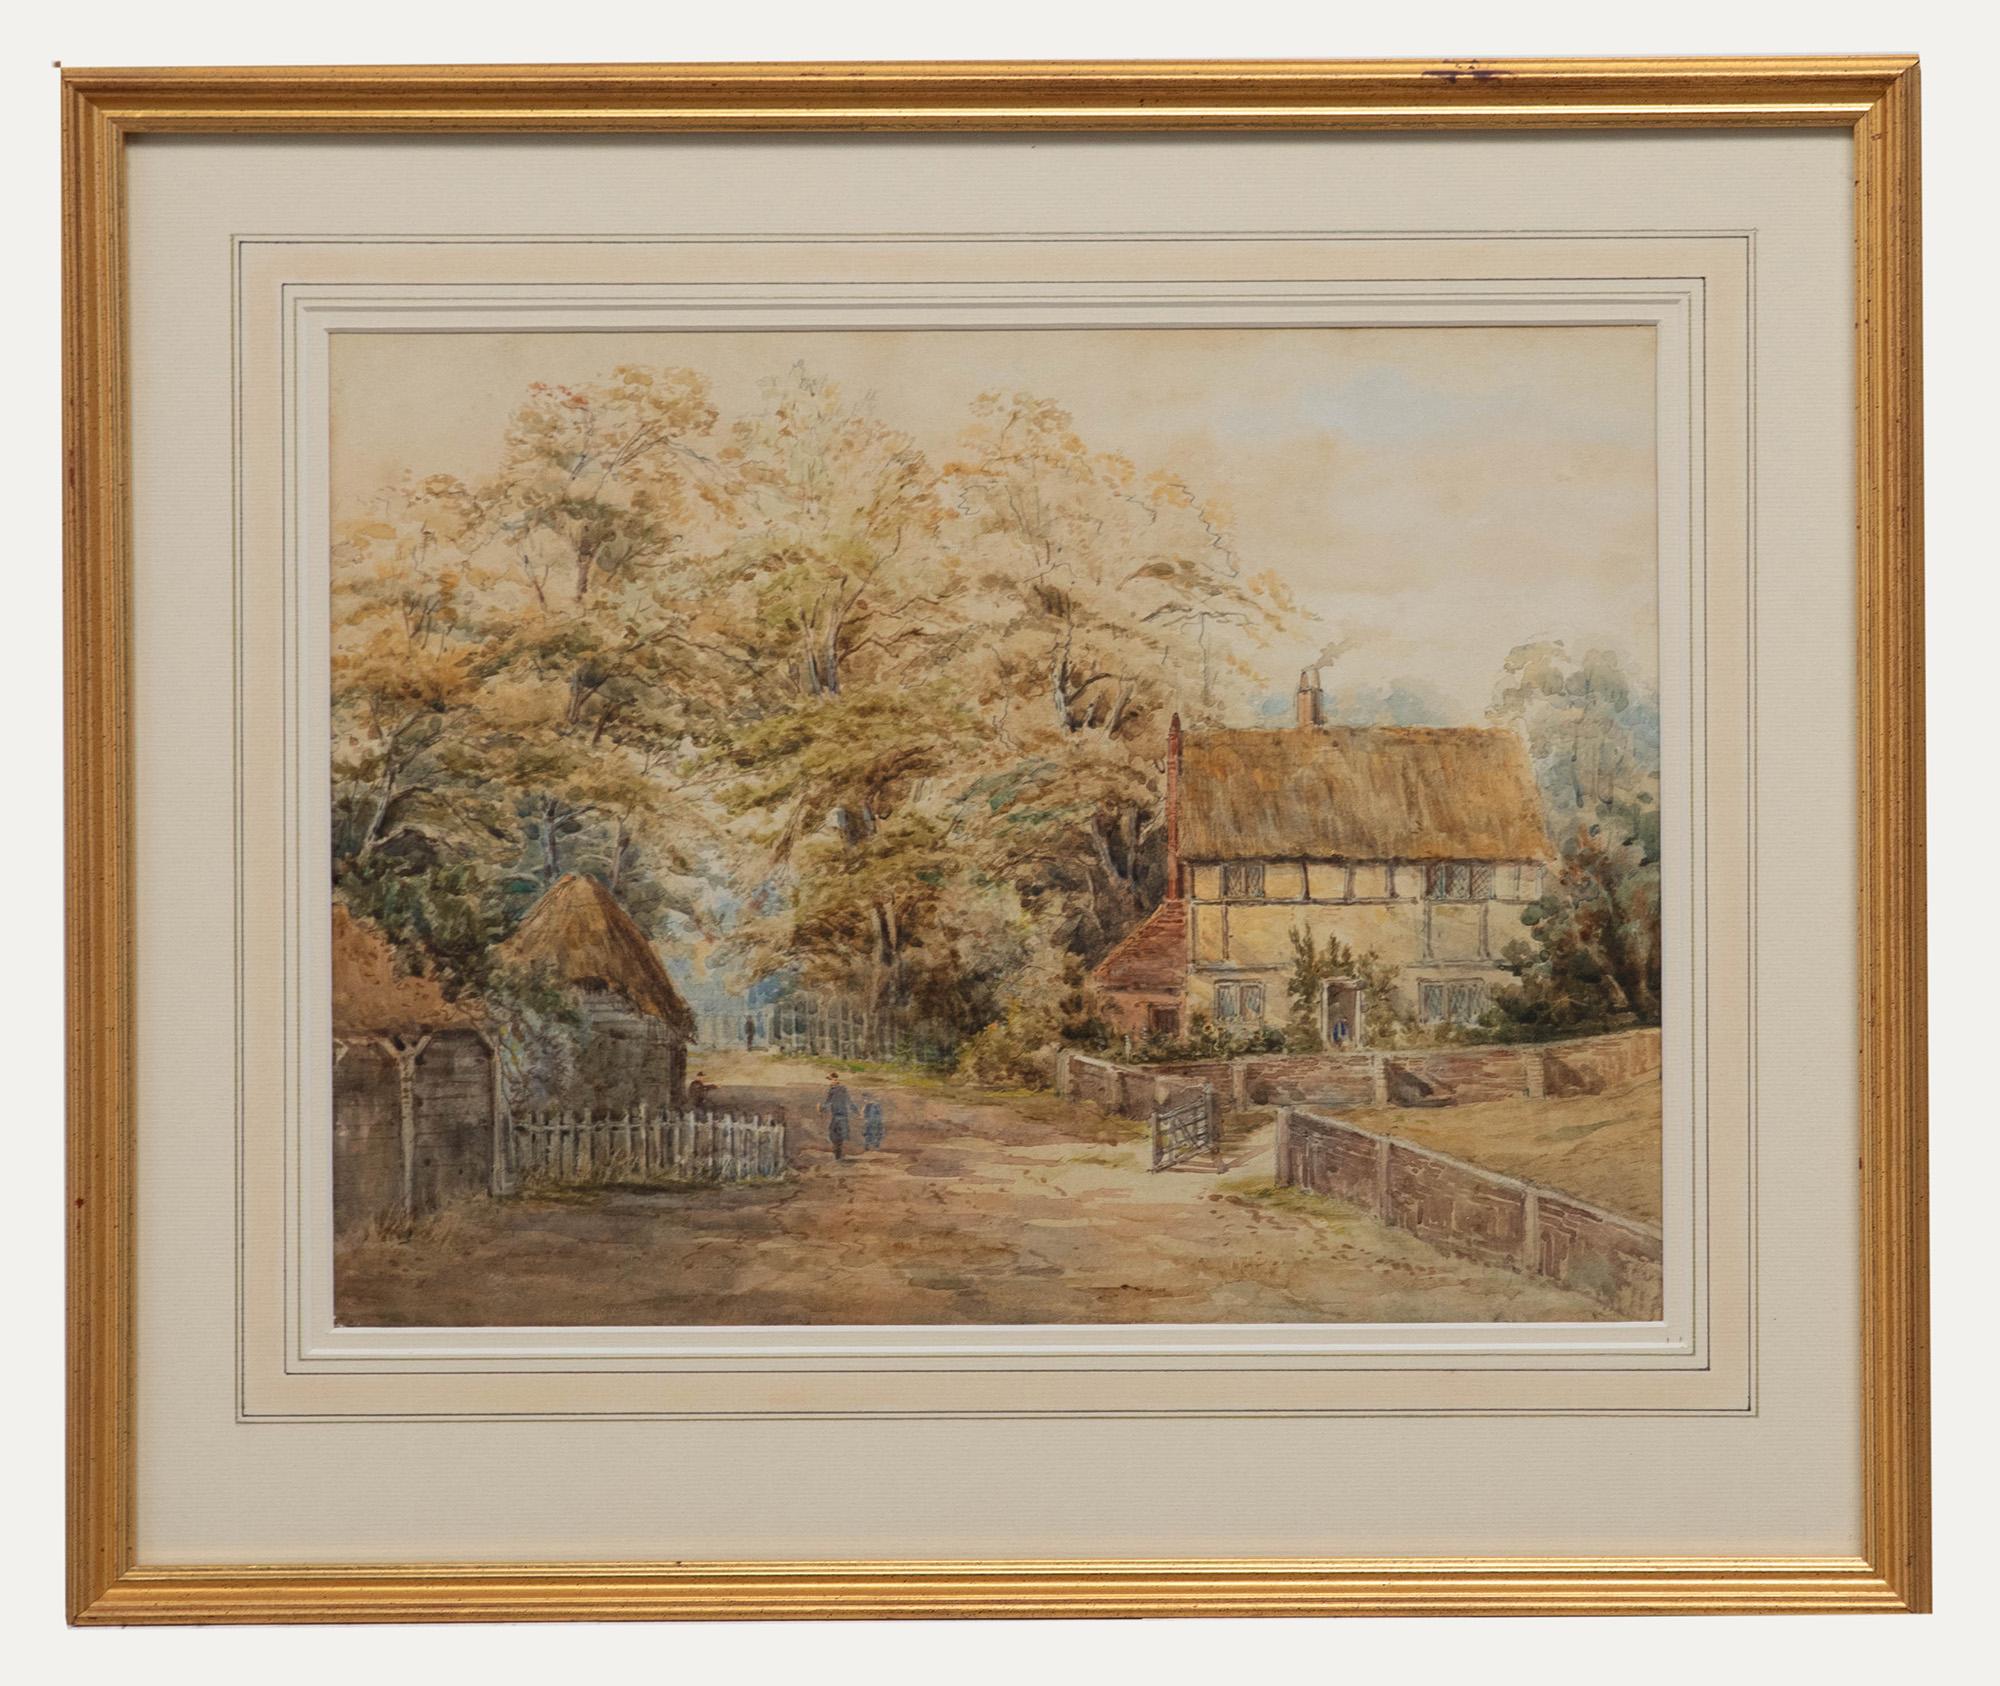 Unknown Landscape Art - Framed 19th Century Watercolour - Village Scene with Thatched Cottage